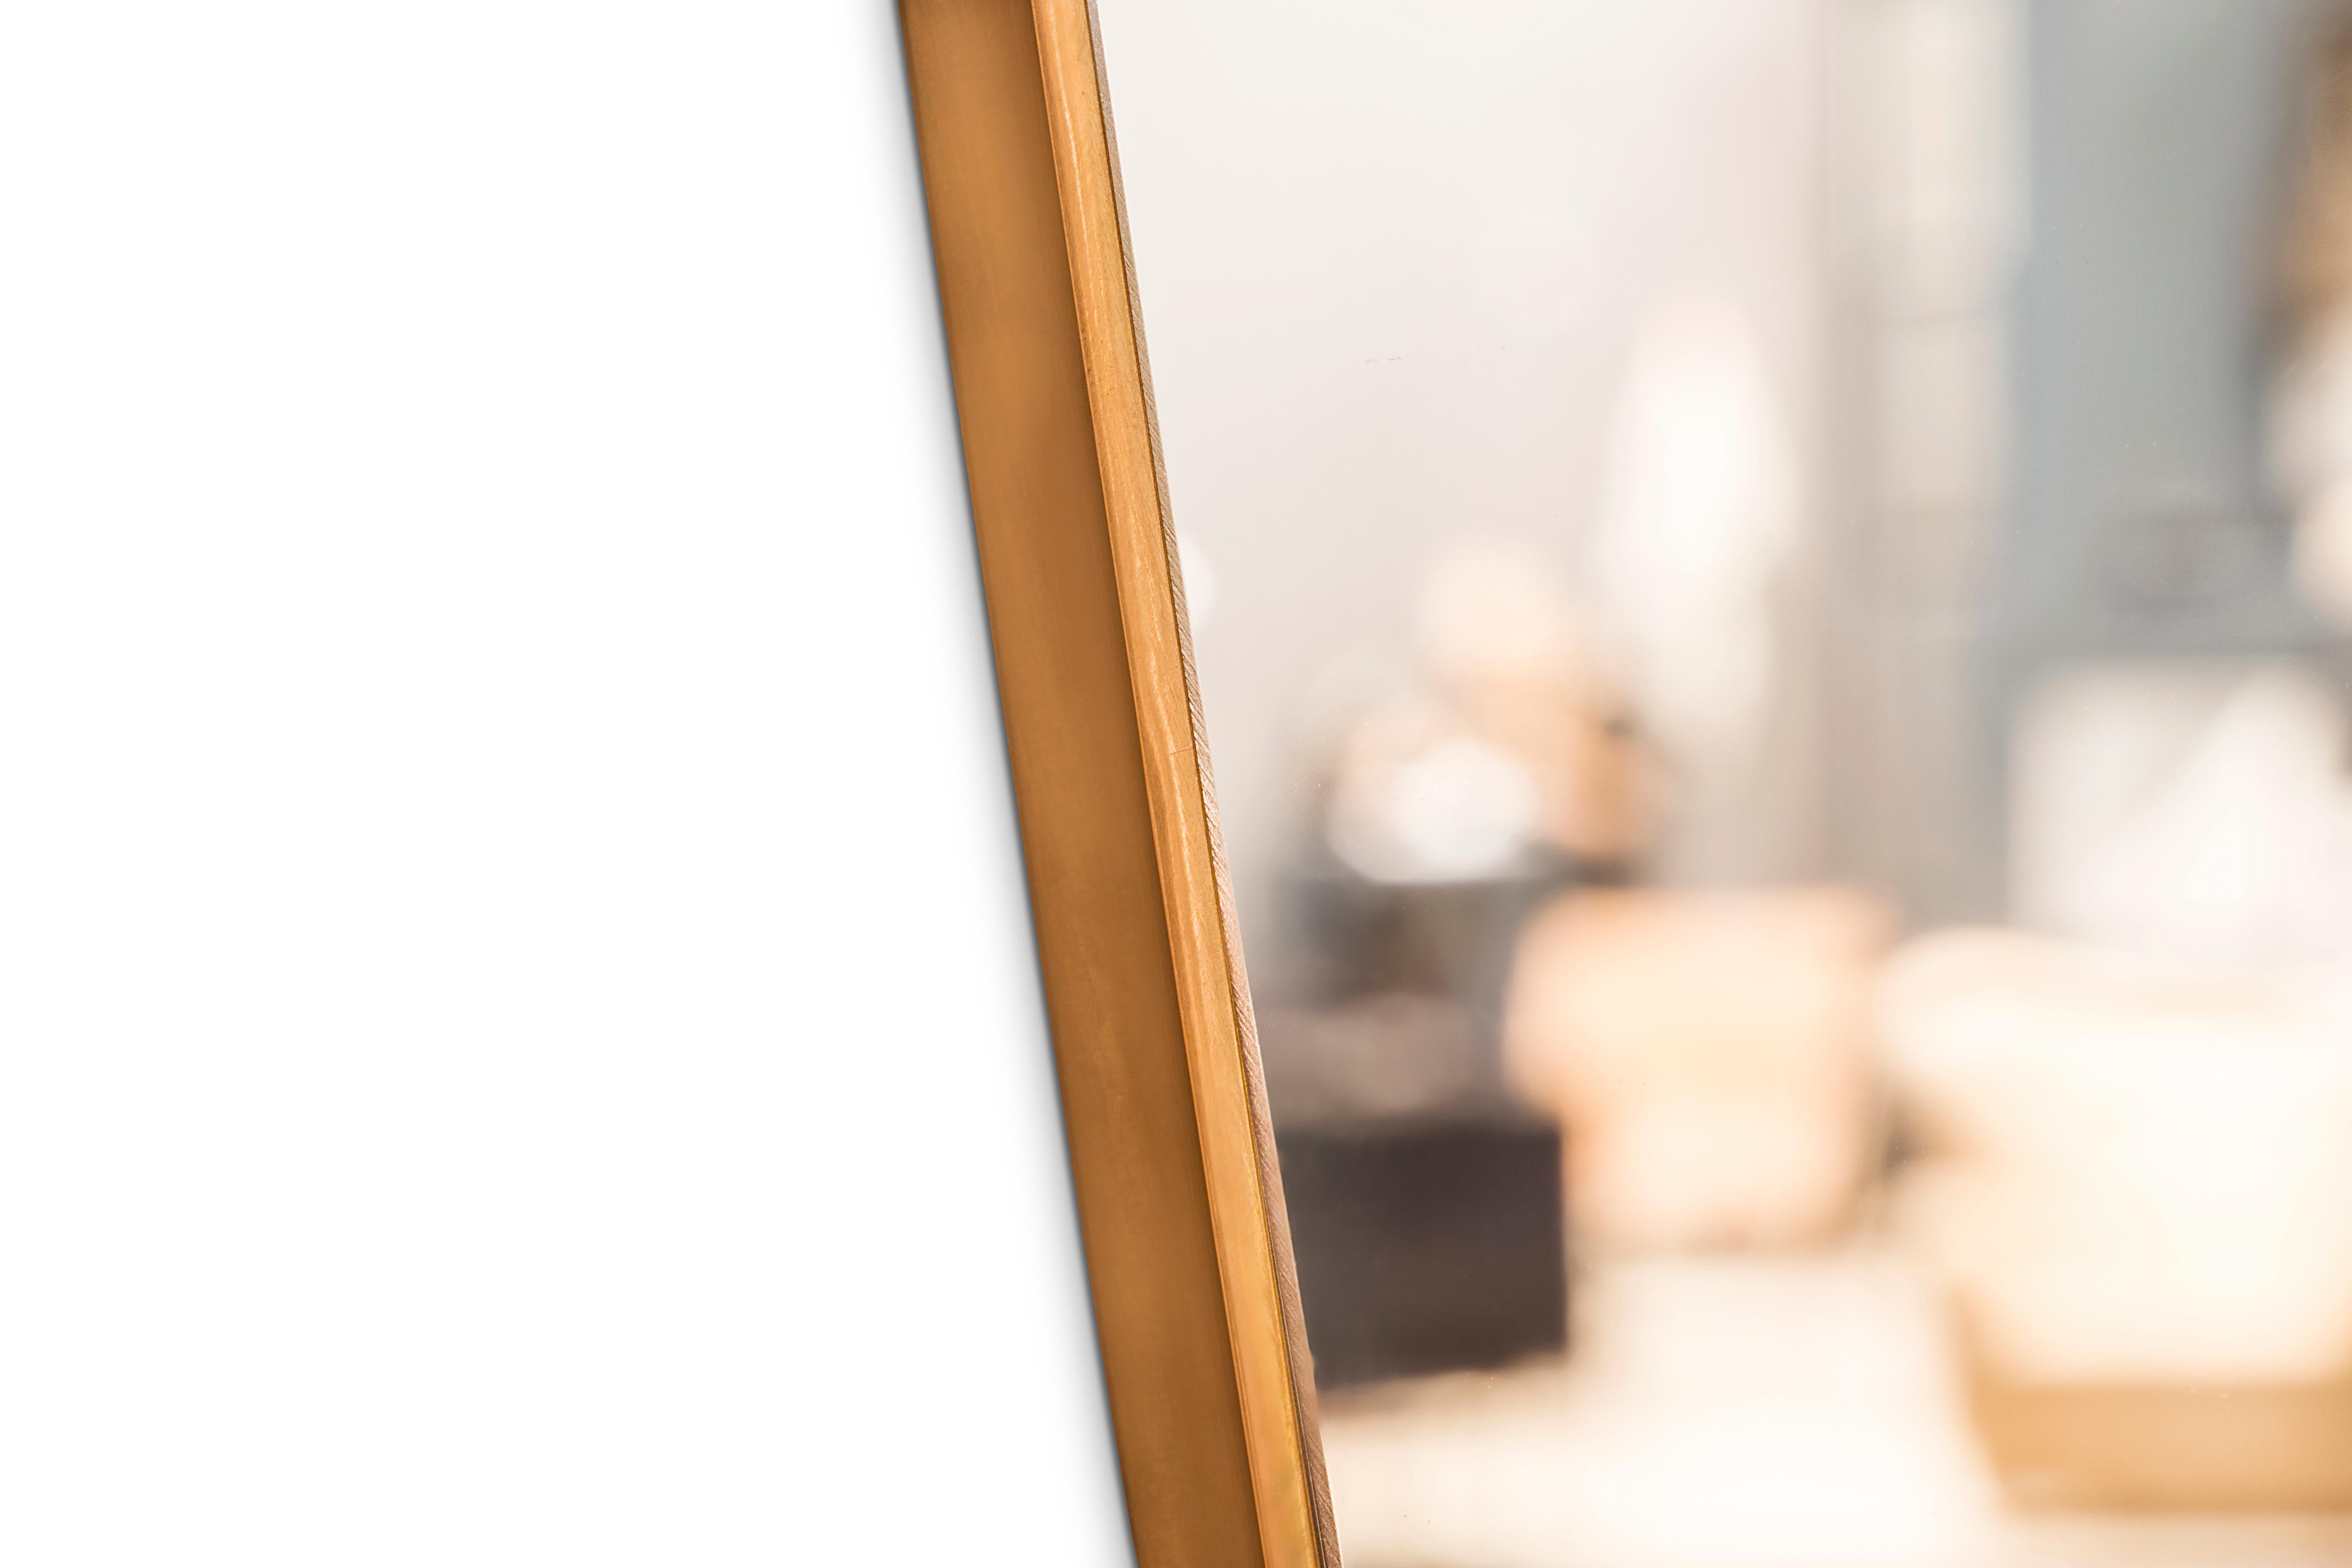 Named after Oscar Wilde, Essential Home presents to you the Wilde Vanity Mirror. The 3 piece item has an irregular shape with a golden strap of plated brass that evokes a mid-century modern style while adding a hint of refinement to any interior. It